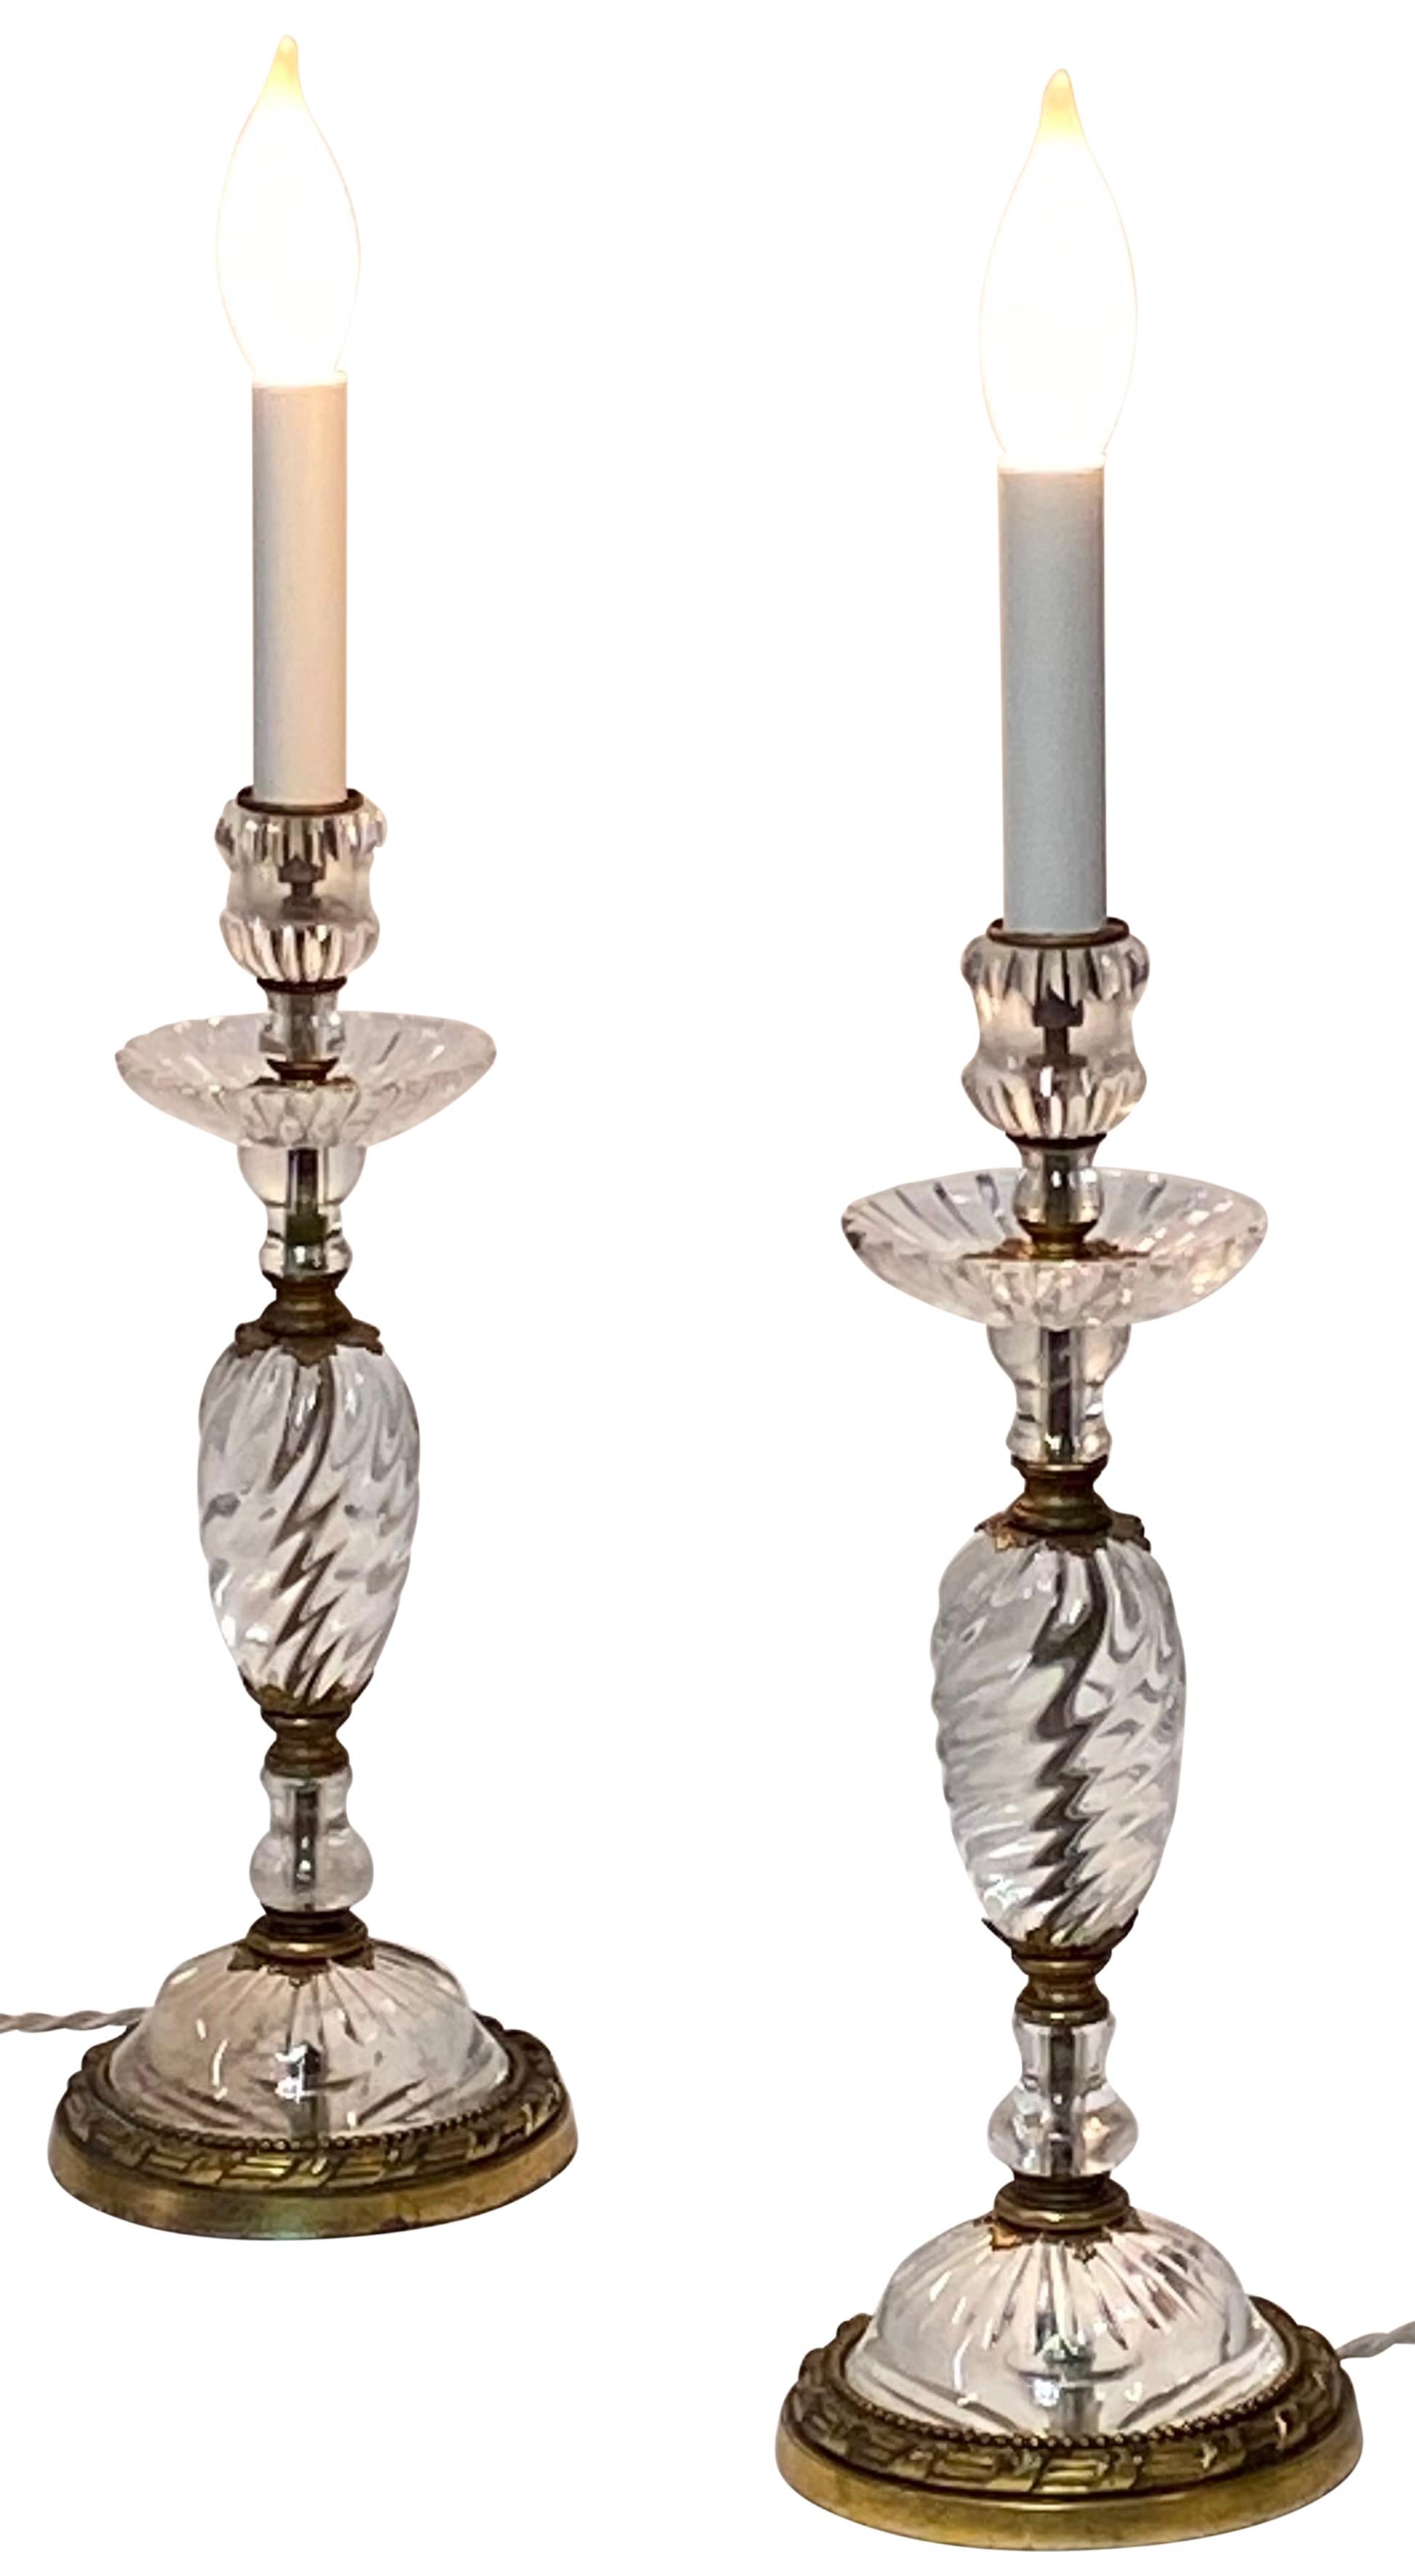 Pair of Early 19th Century French Rock Crystal Candle Stick Boudoir Lamps For Sale 5